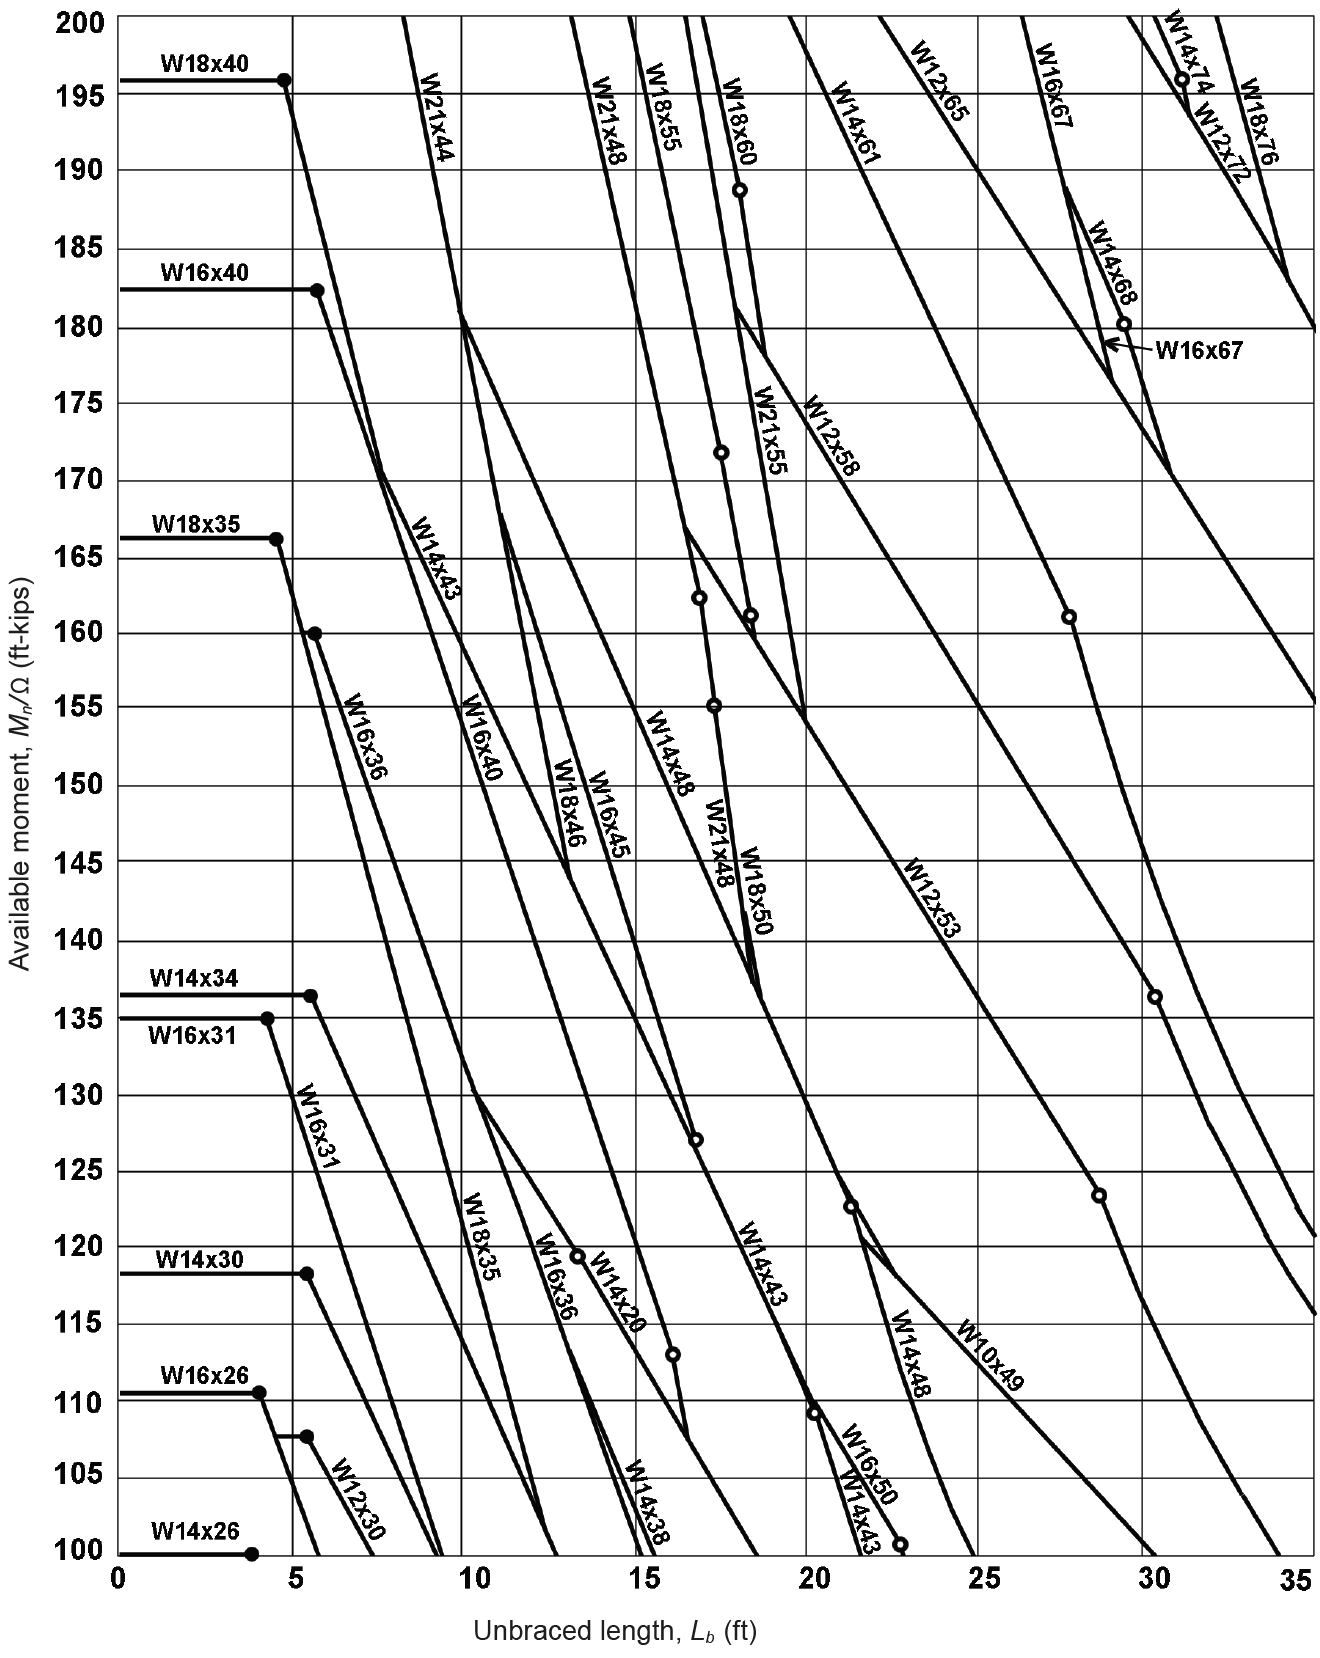 graph showing available moments for wide-flange shapes